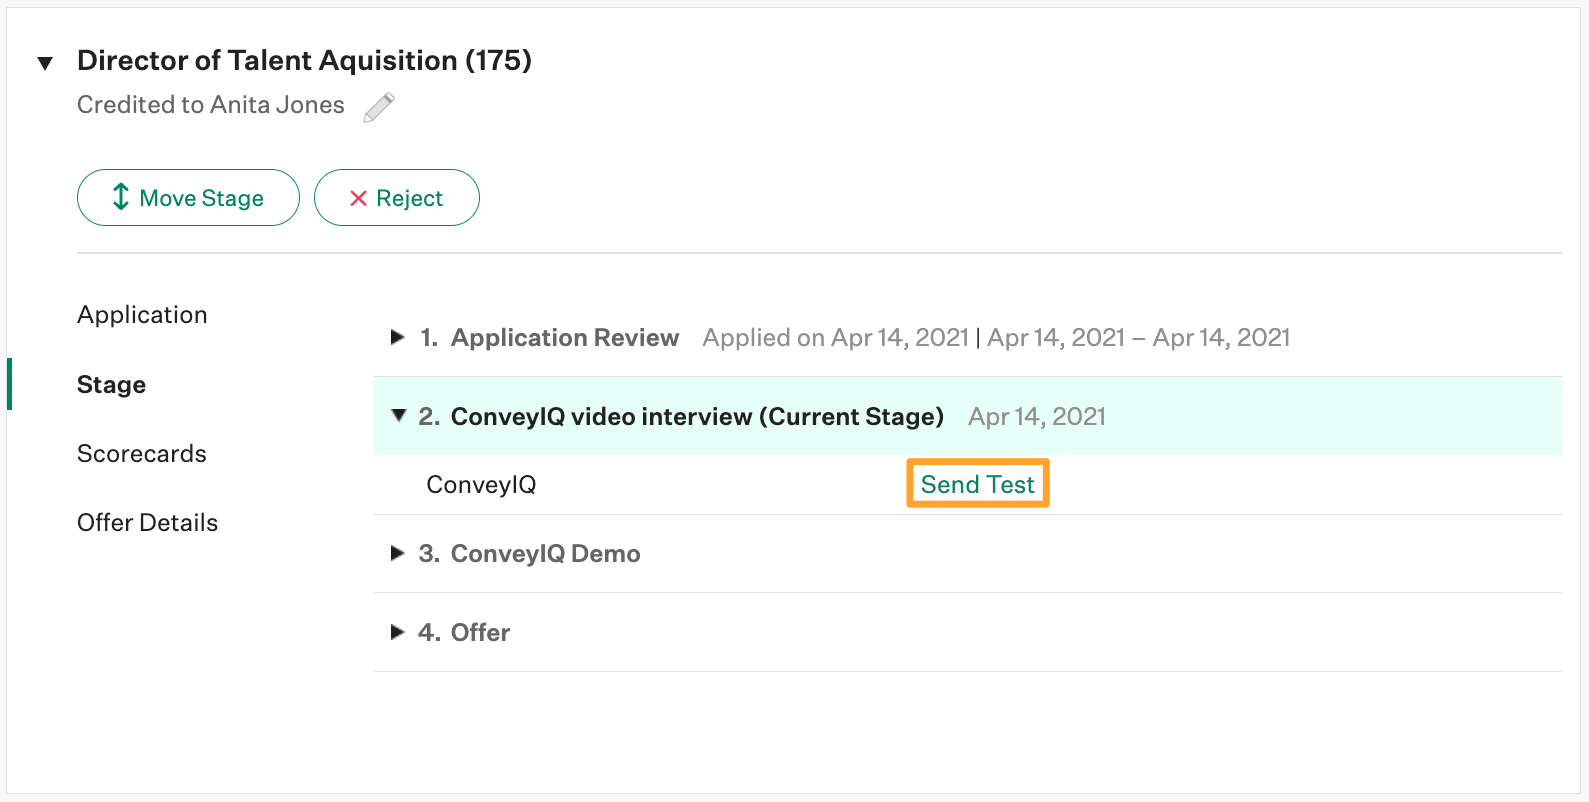 ConveyIQ video interview stage shows Send Test button highlighted in marigold emphasis box